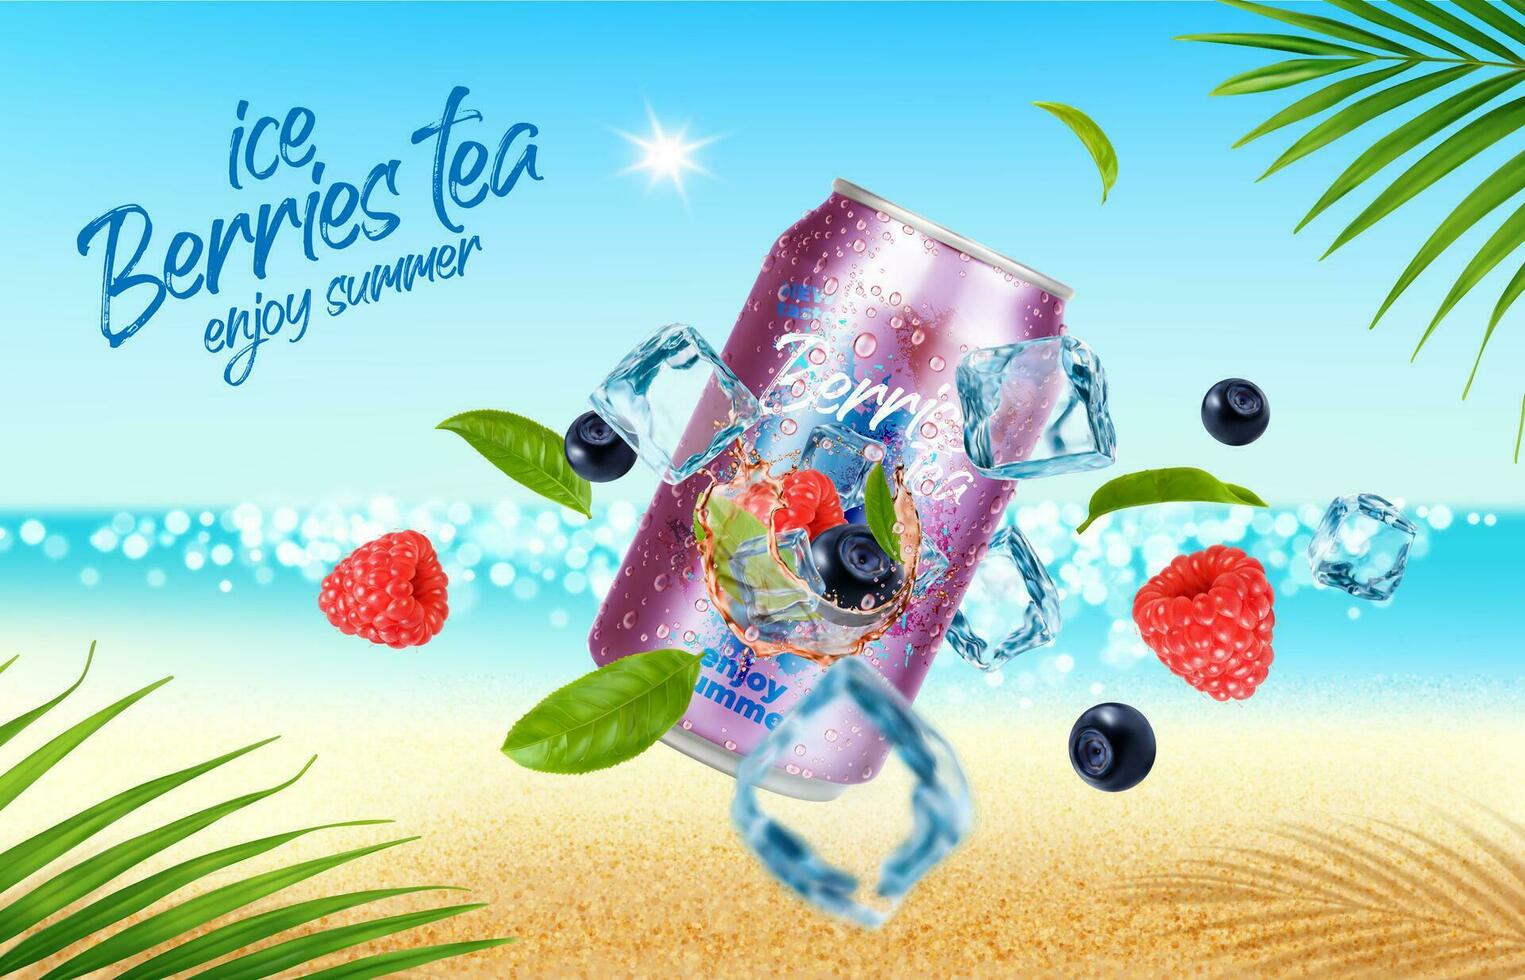 Wild berries tea can and ice cubes on summer beach vector